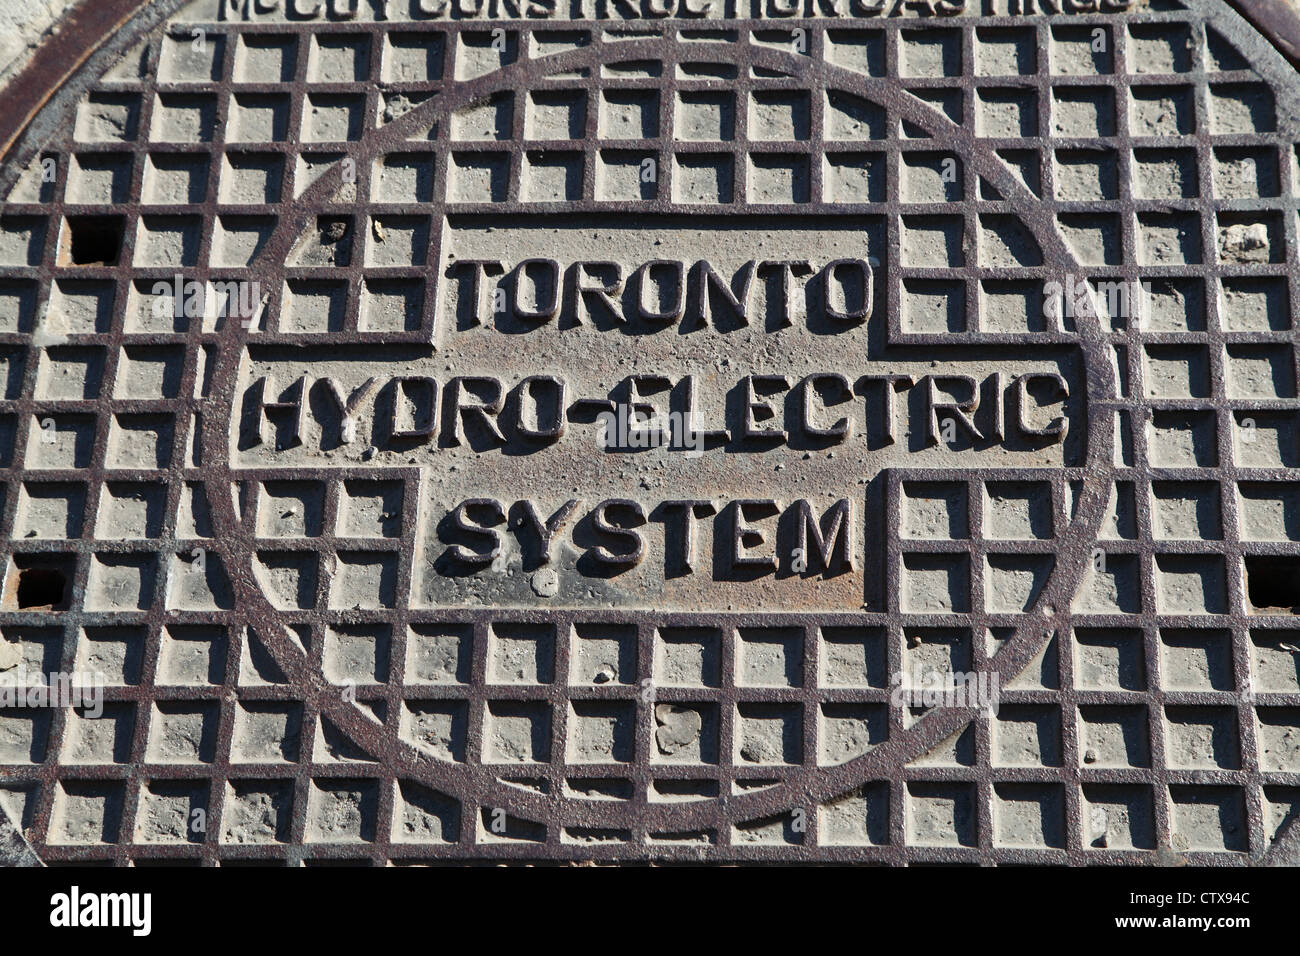 toronto-hydro-electric-manhole-cover-on-the-pavement-in-toronto-CTX94C